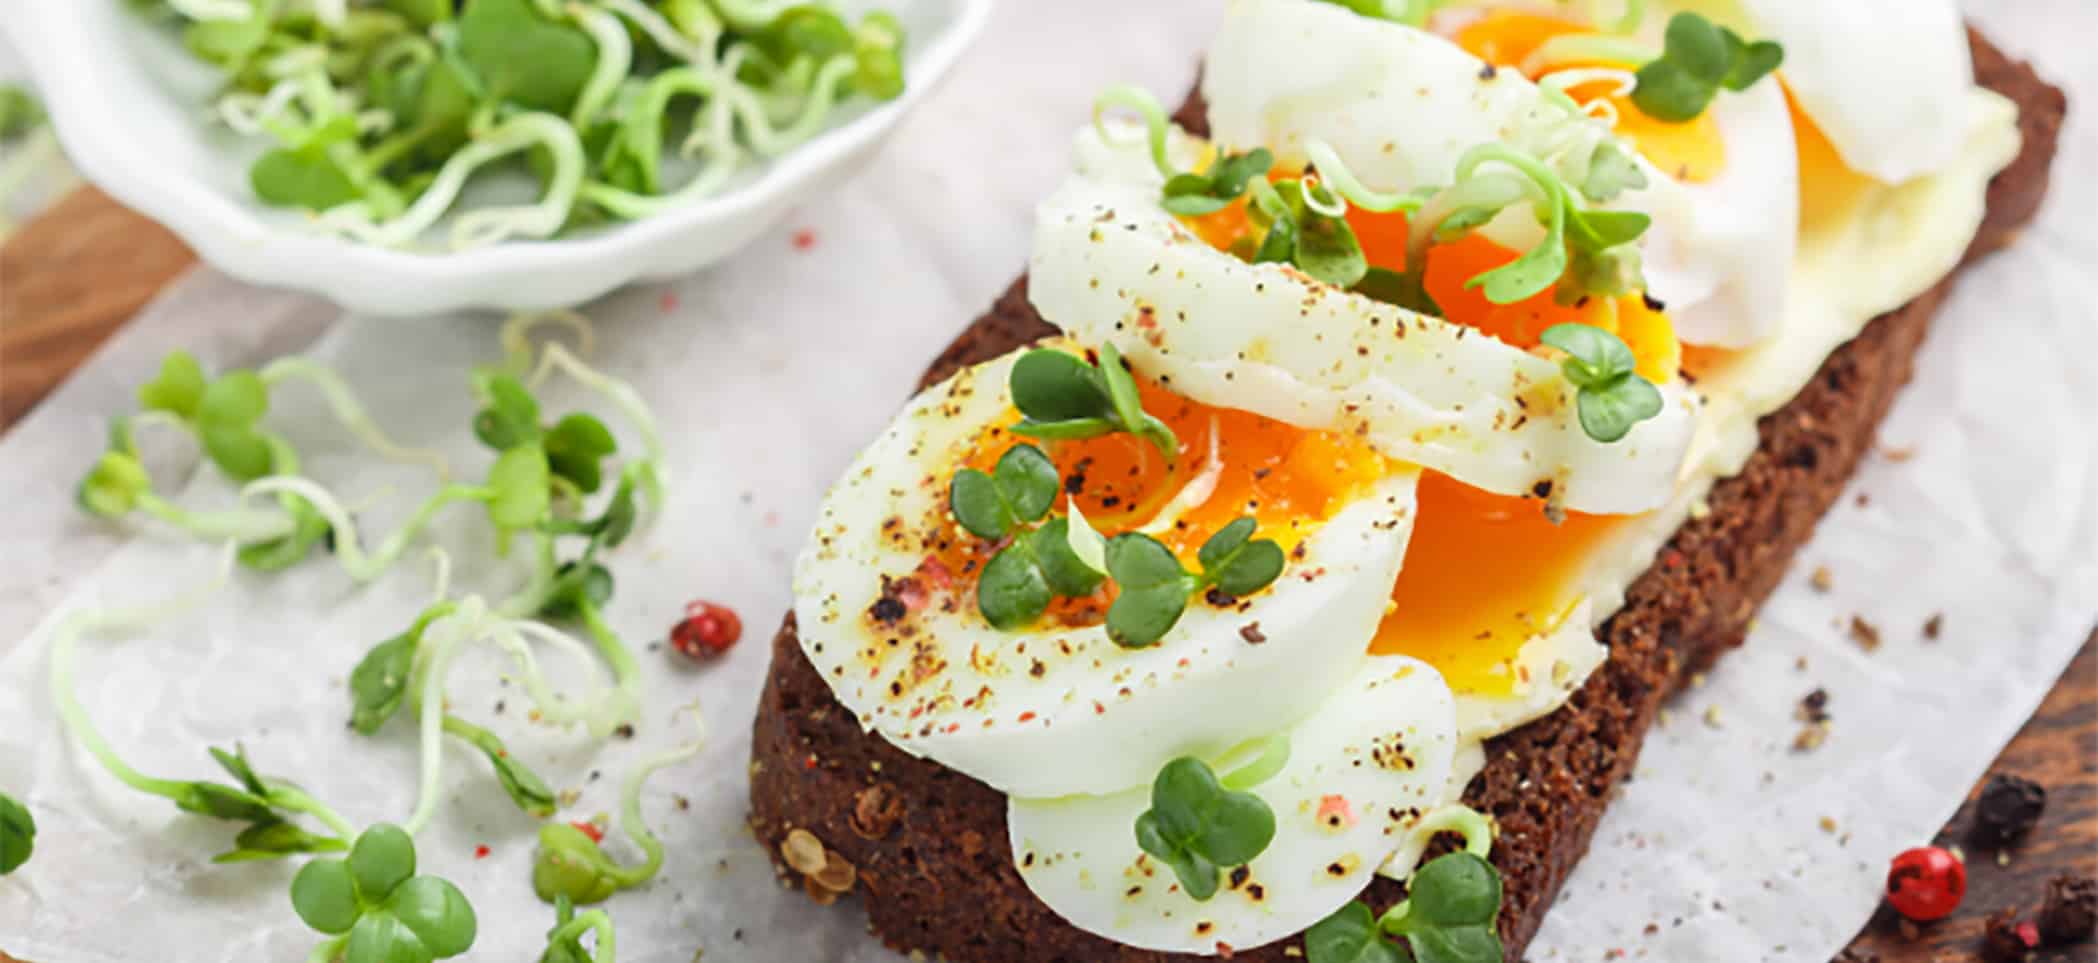 medium-boiled egg slices and pea sprouts on toast